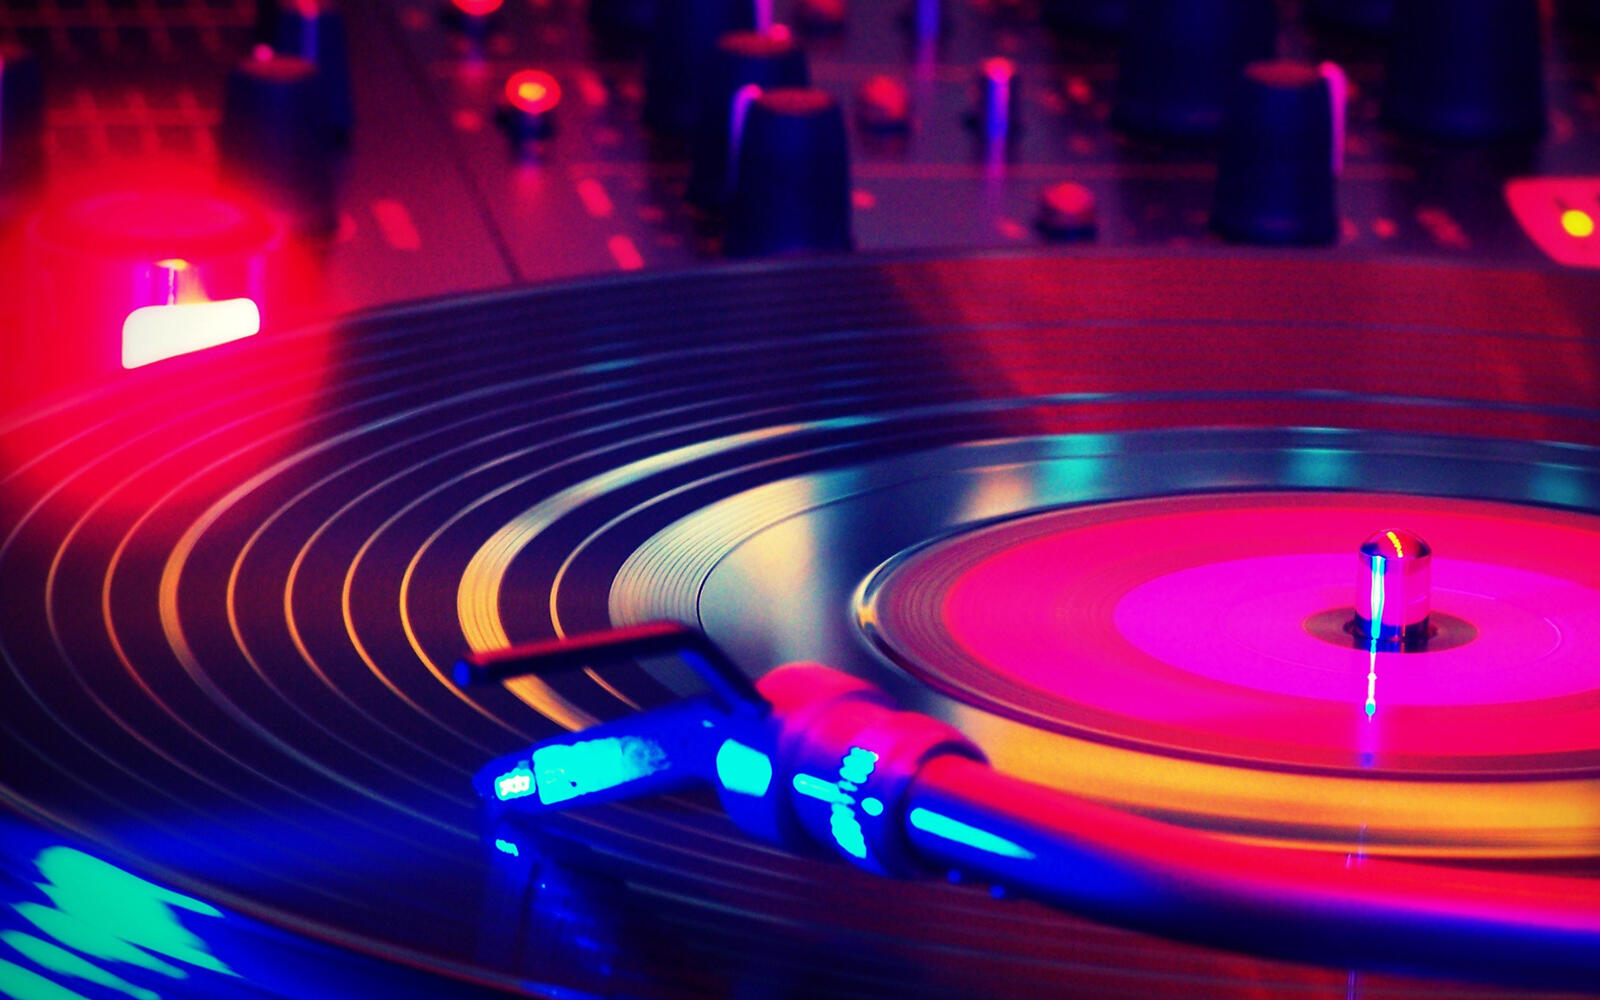 Wallpapers vinyl disc record player on the desktop